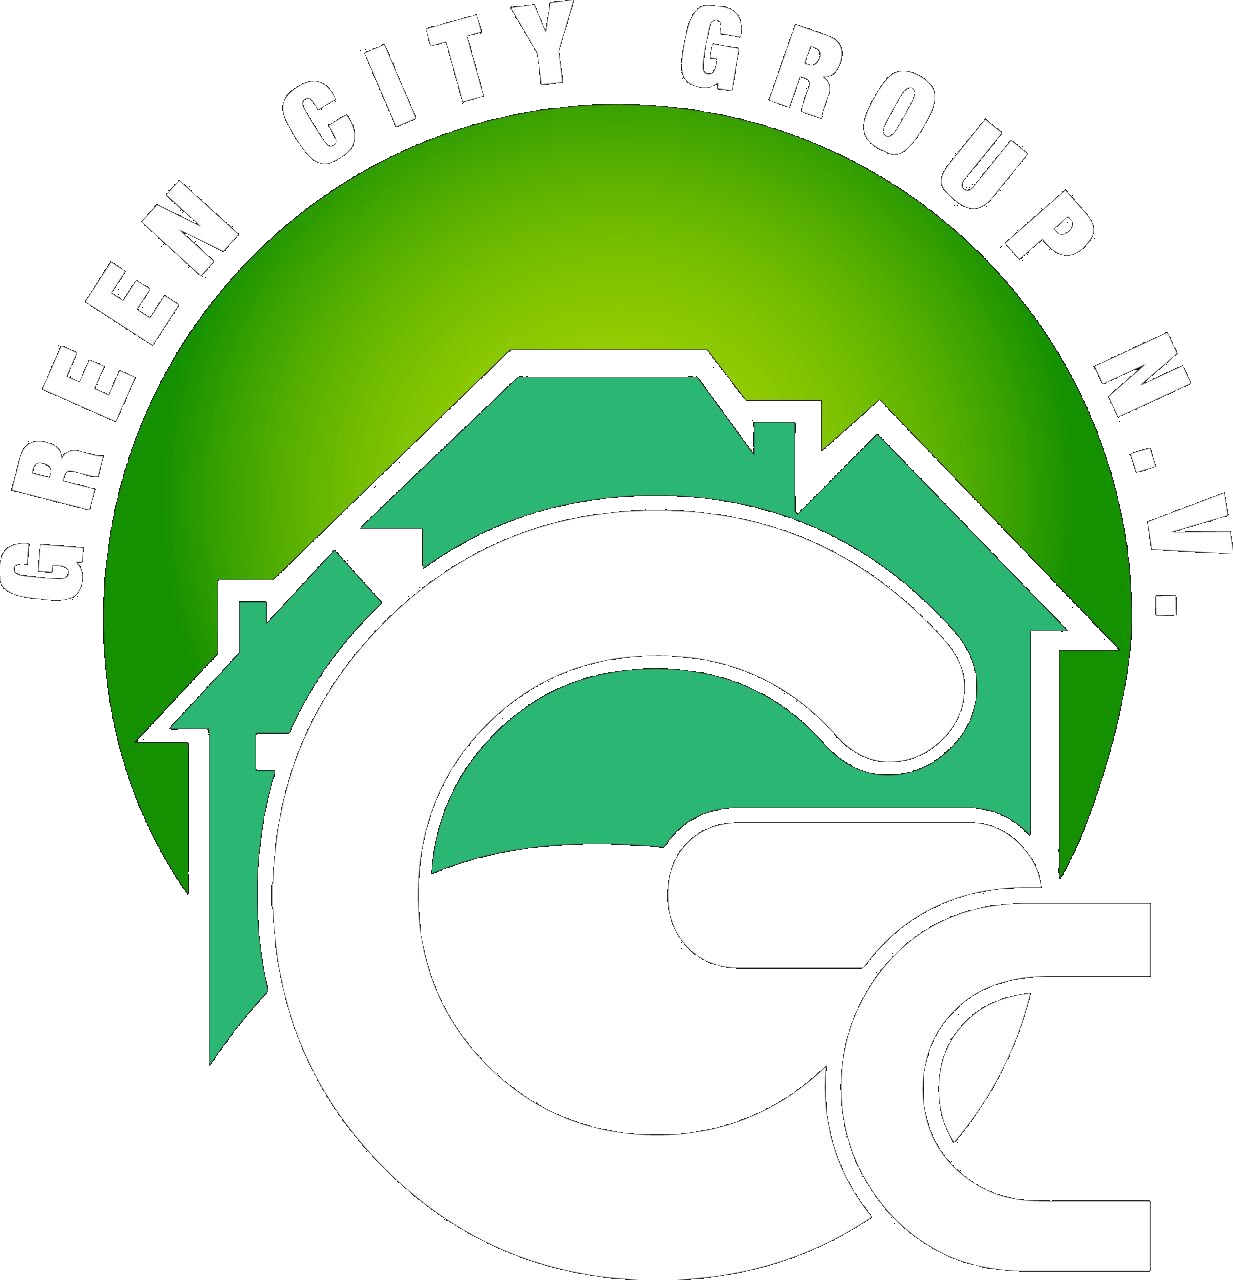 Green City GroupGreen City Group